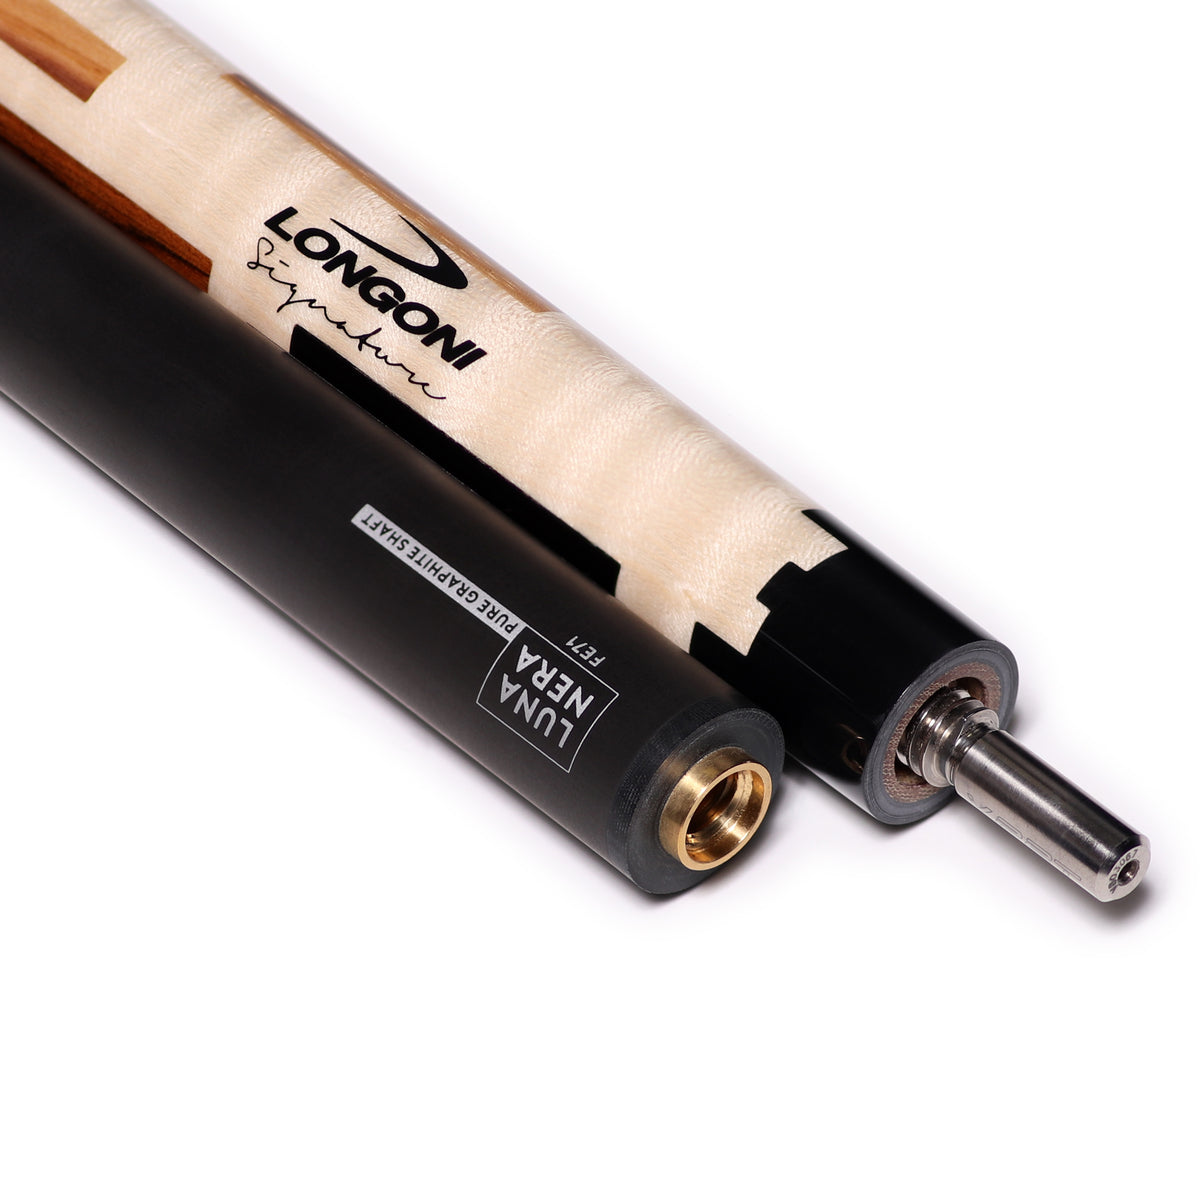 LONGONI CAROM CUE ARMONIA WOOD JOINT WITH S20 E71 SHAFTS